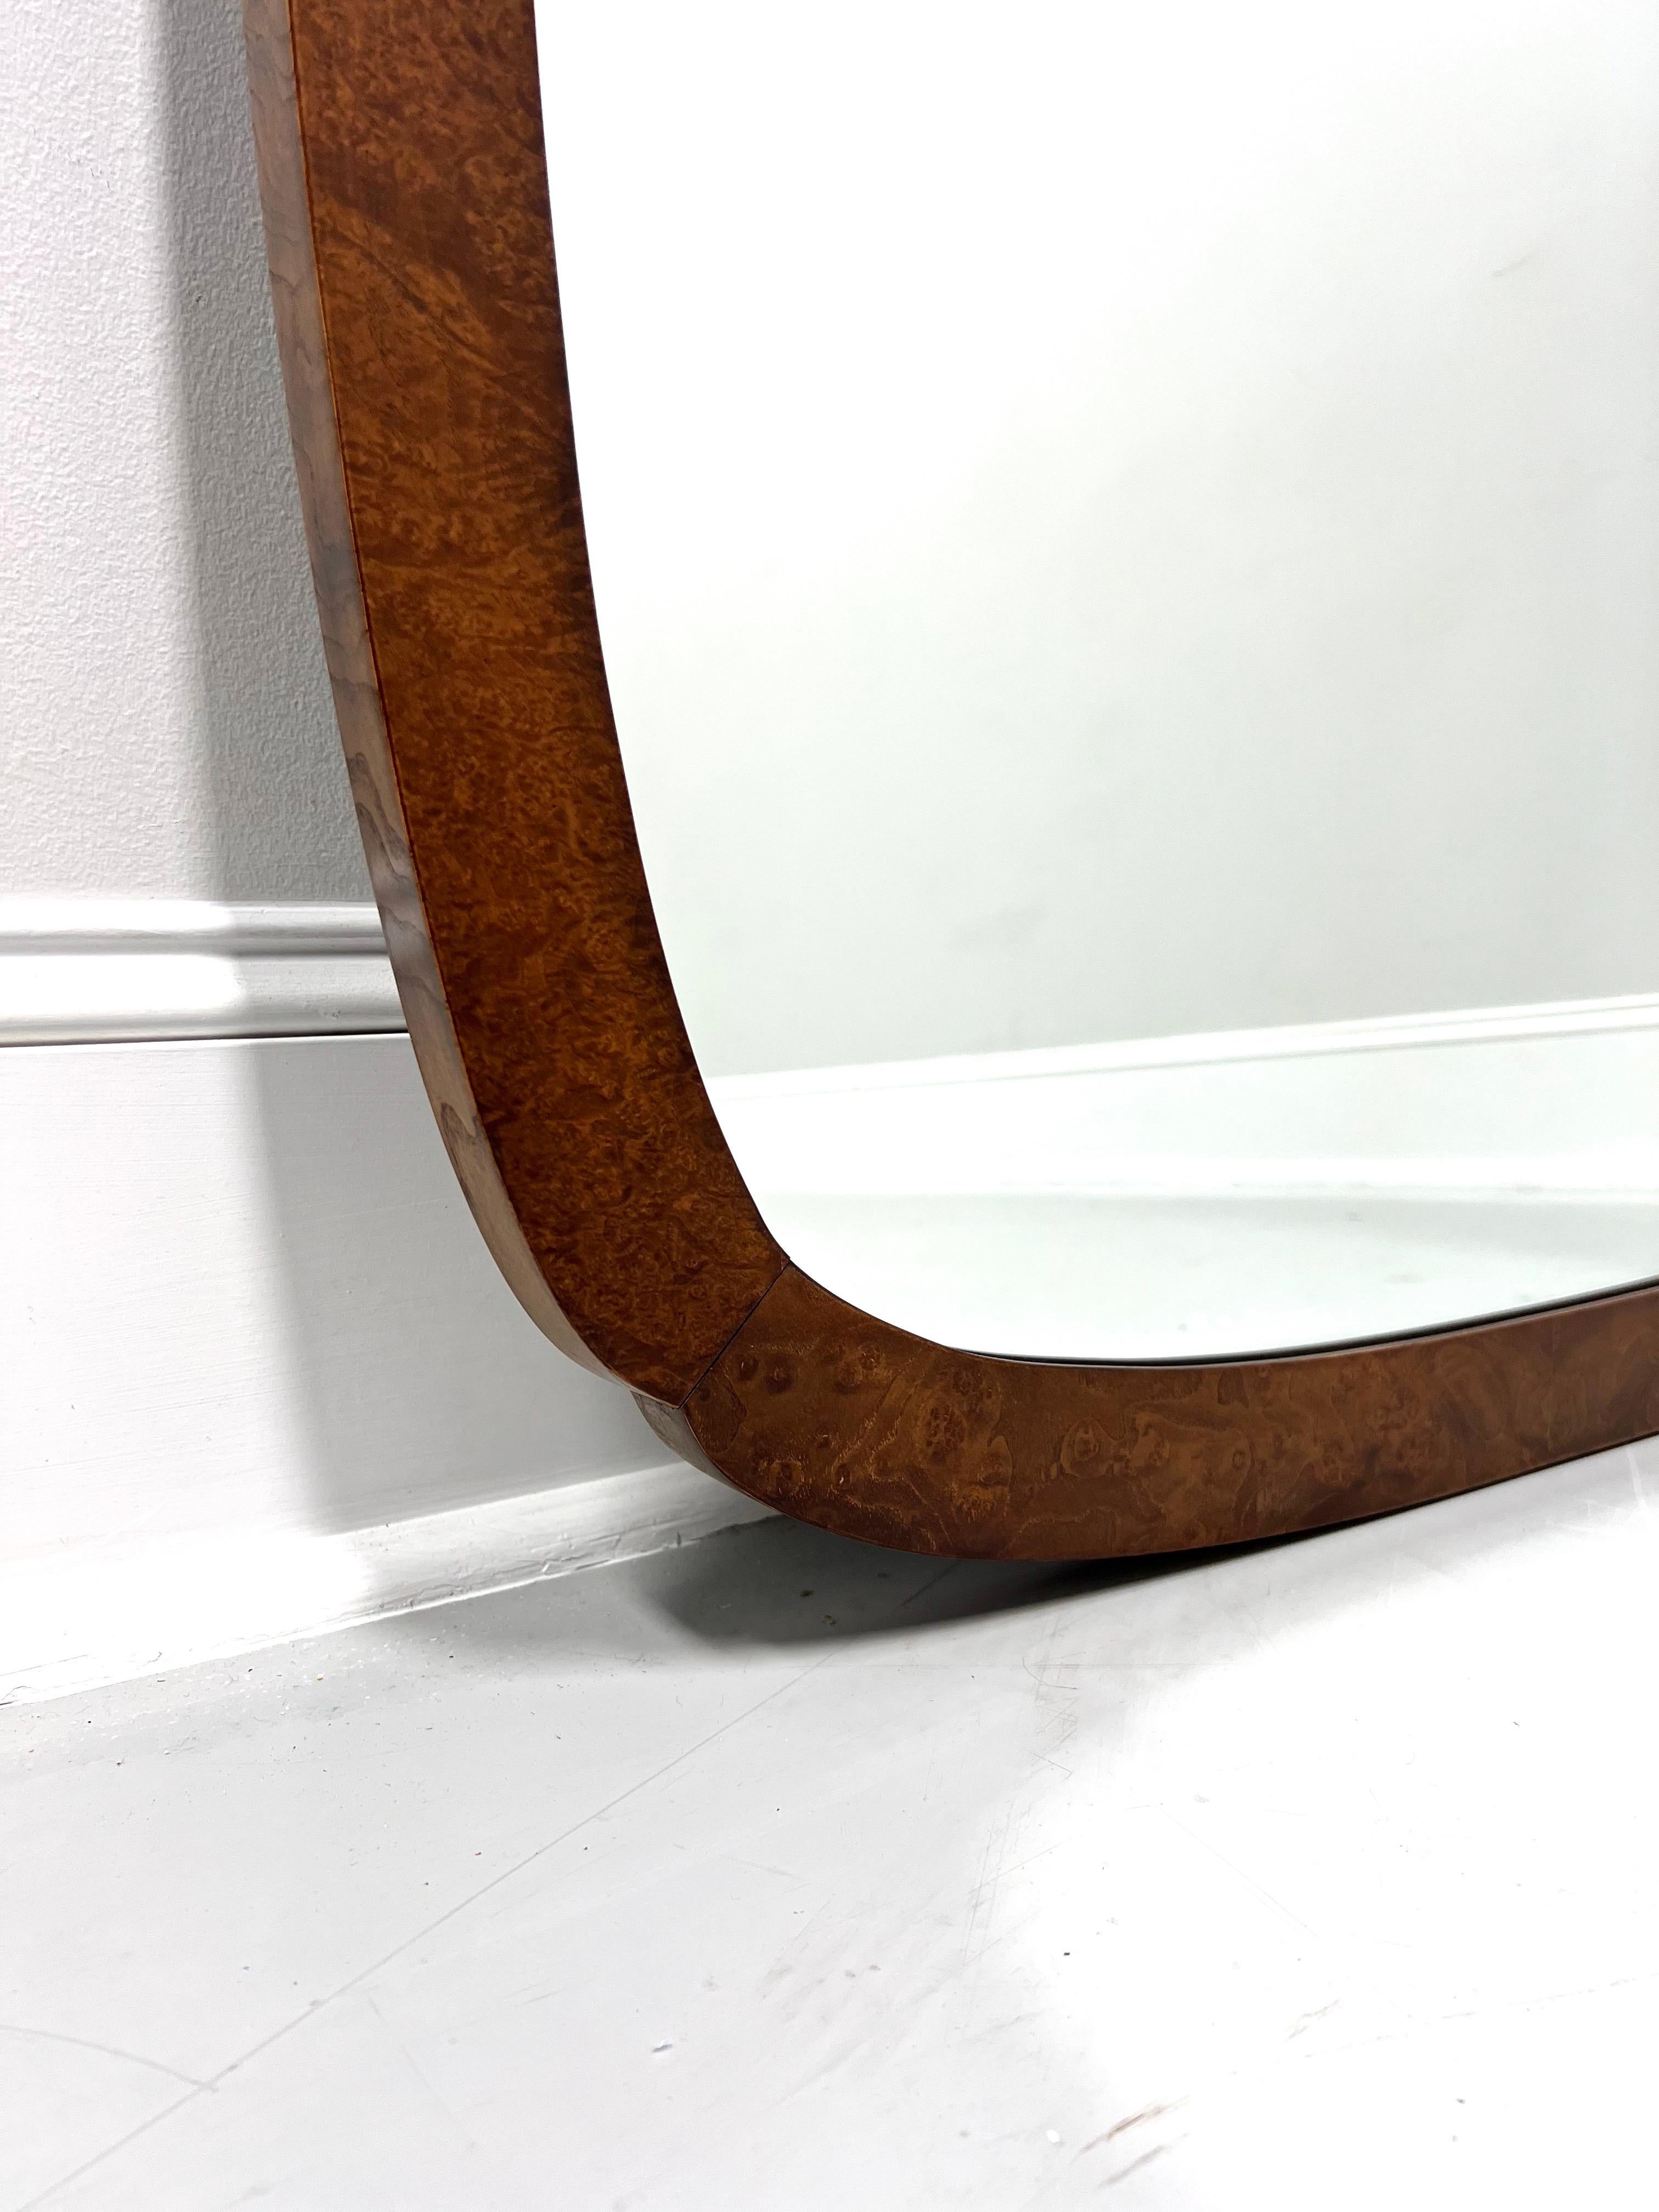 American BAKER Burl Walnut Asian Inspired Wall Mirror with Clipped Corners